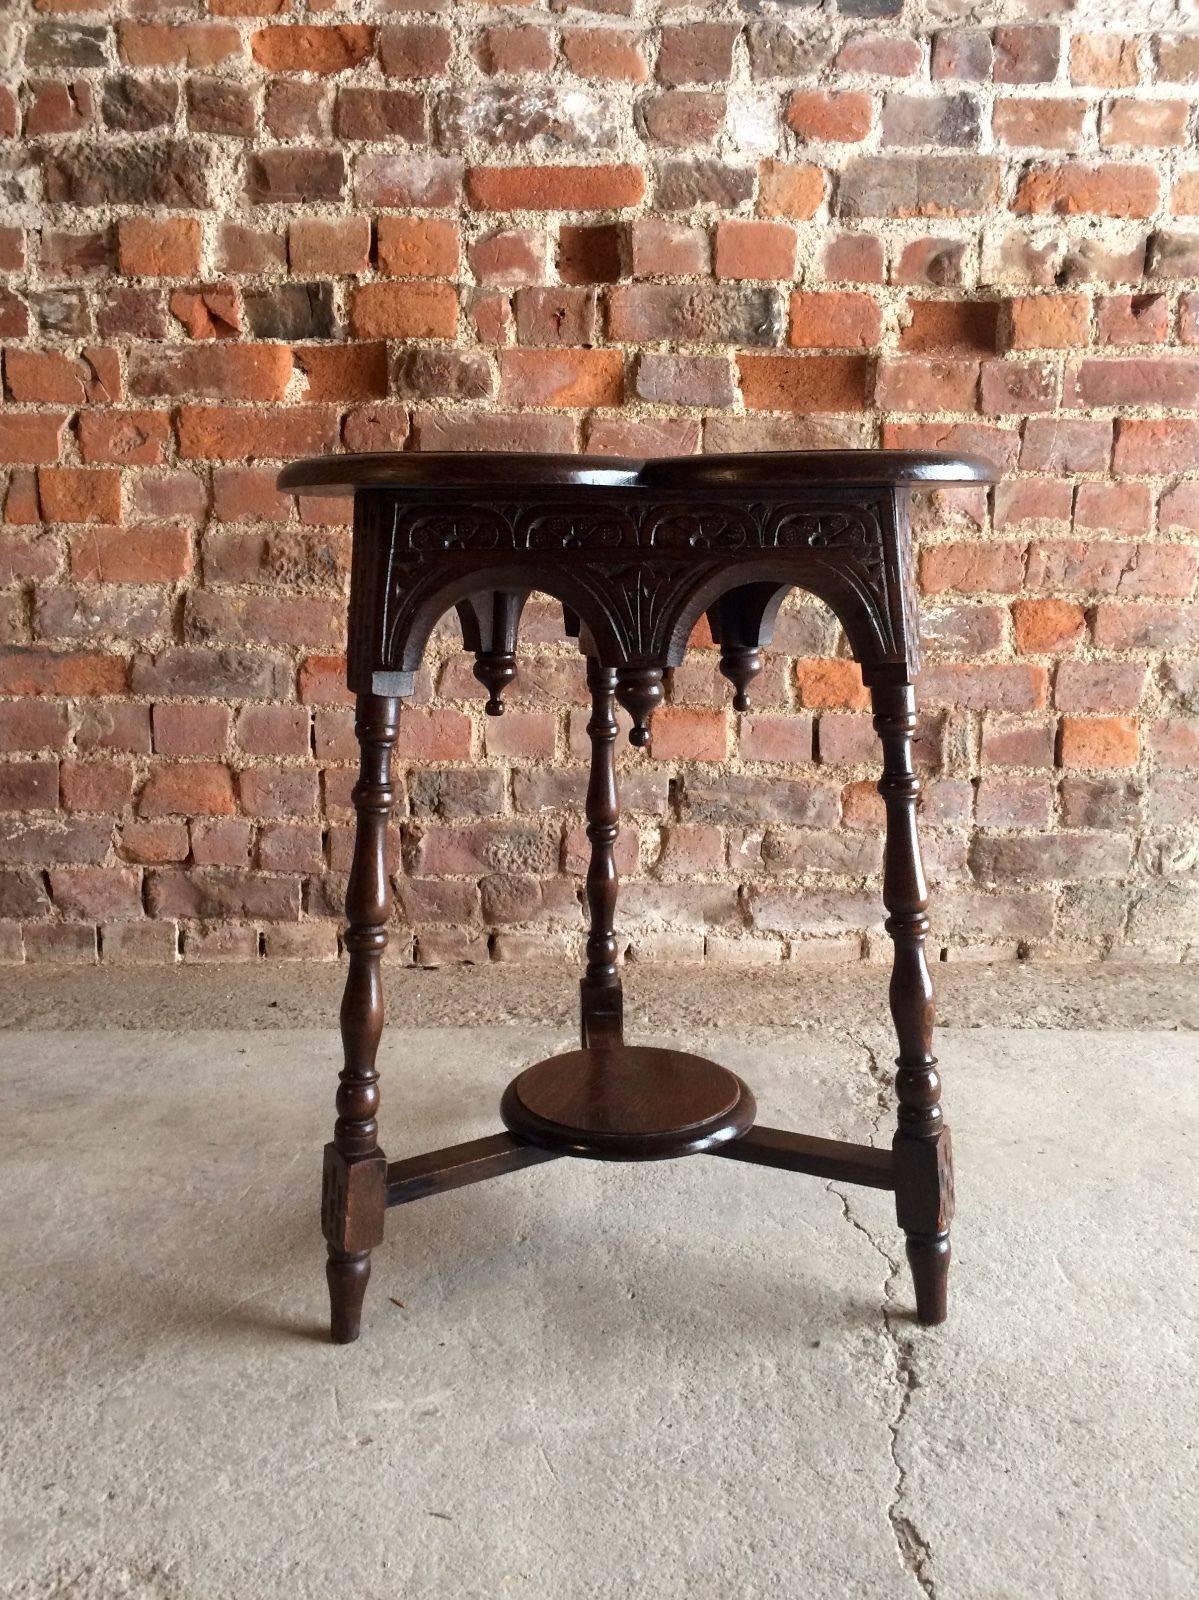 A stunning solid oak Victorian 19th century heavily carved three leg trefoil table, having parcel shelf and Gothic carvings of thistles and flowers, looks amazing.